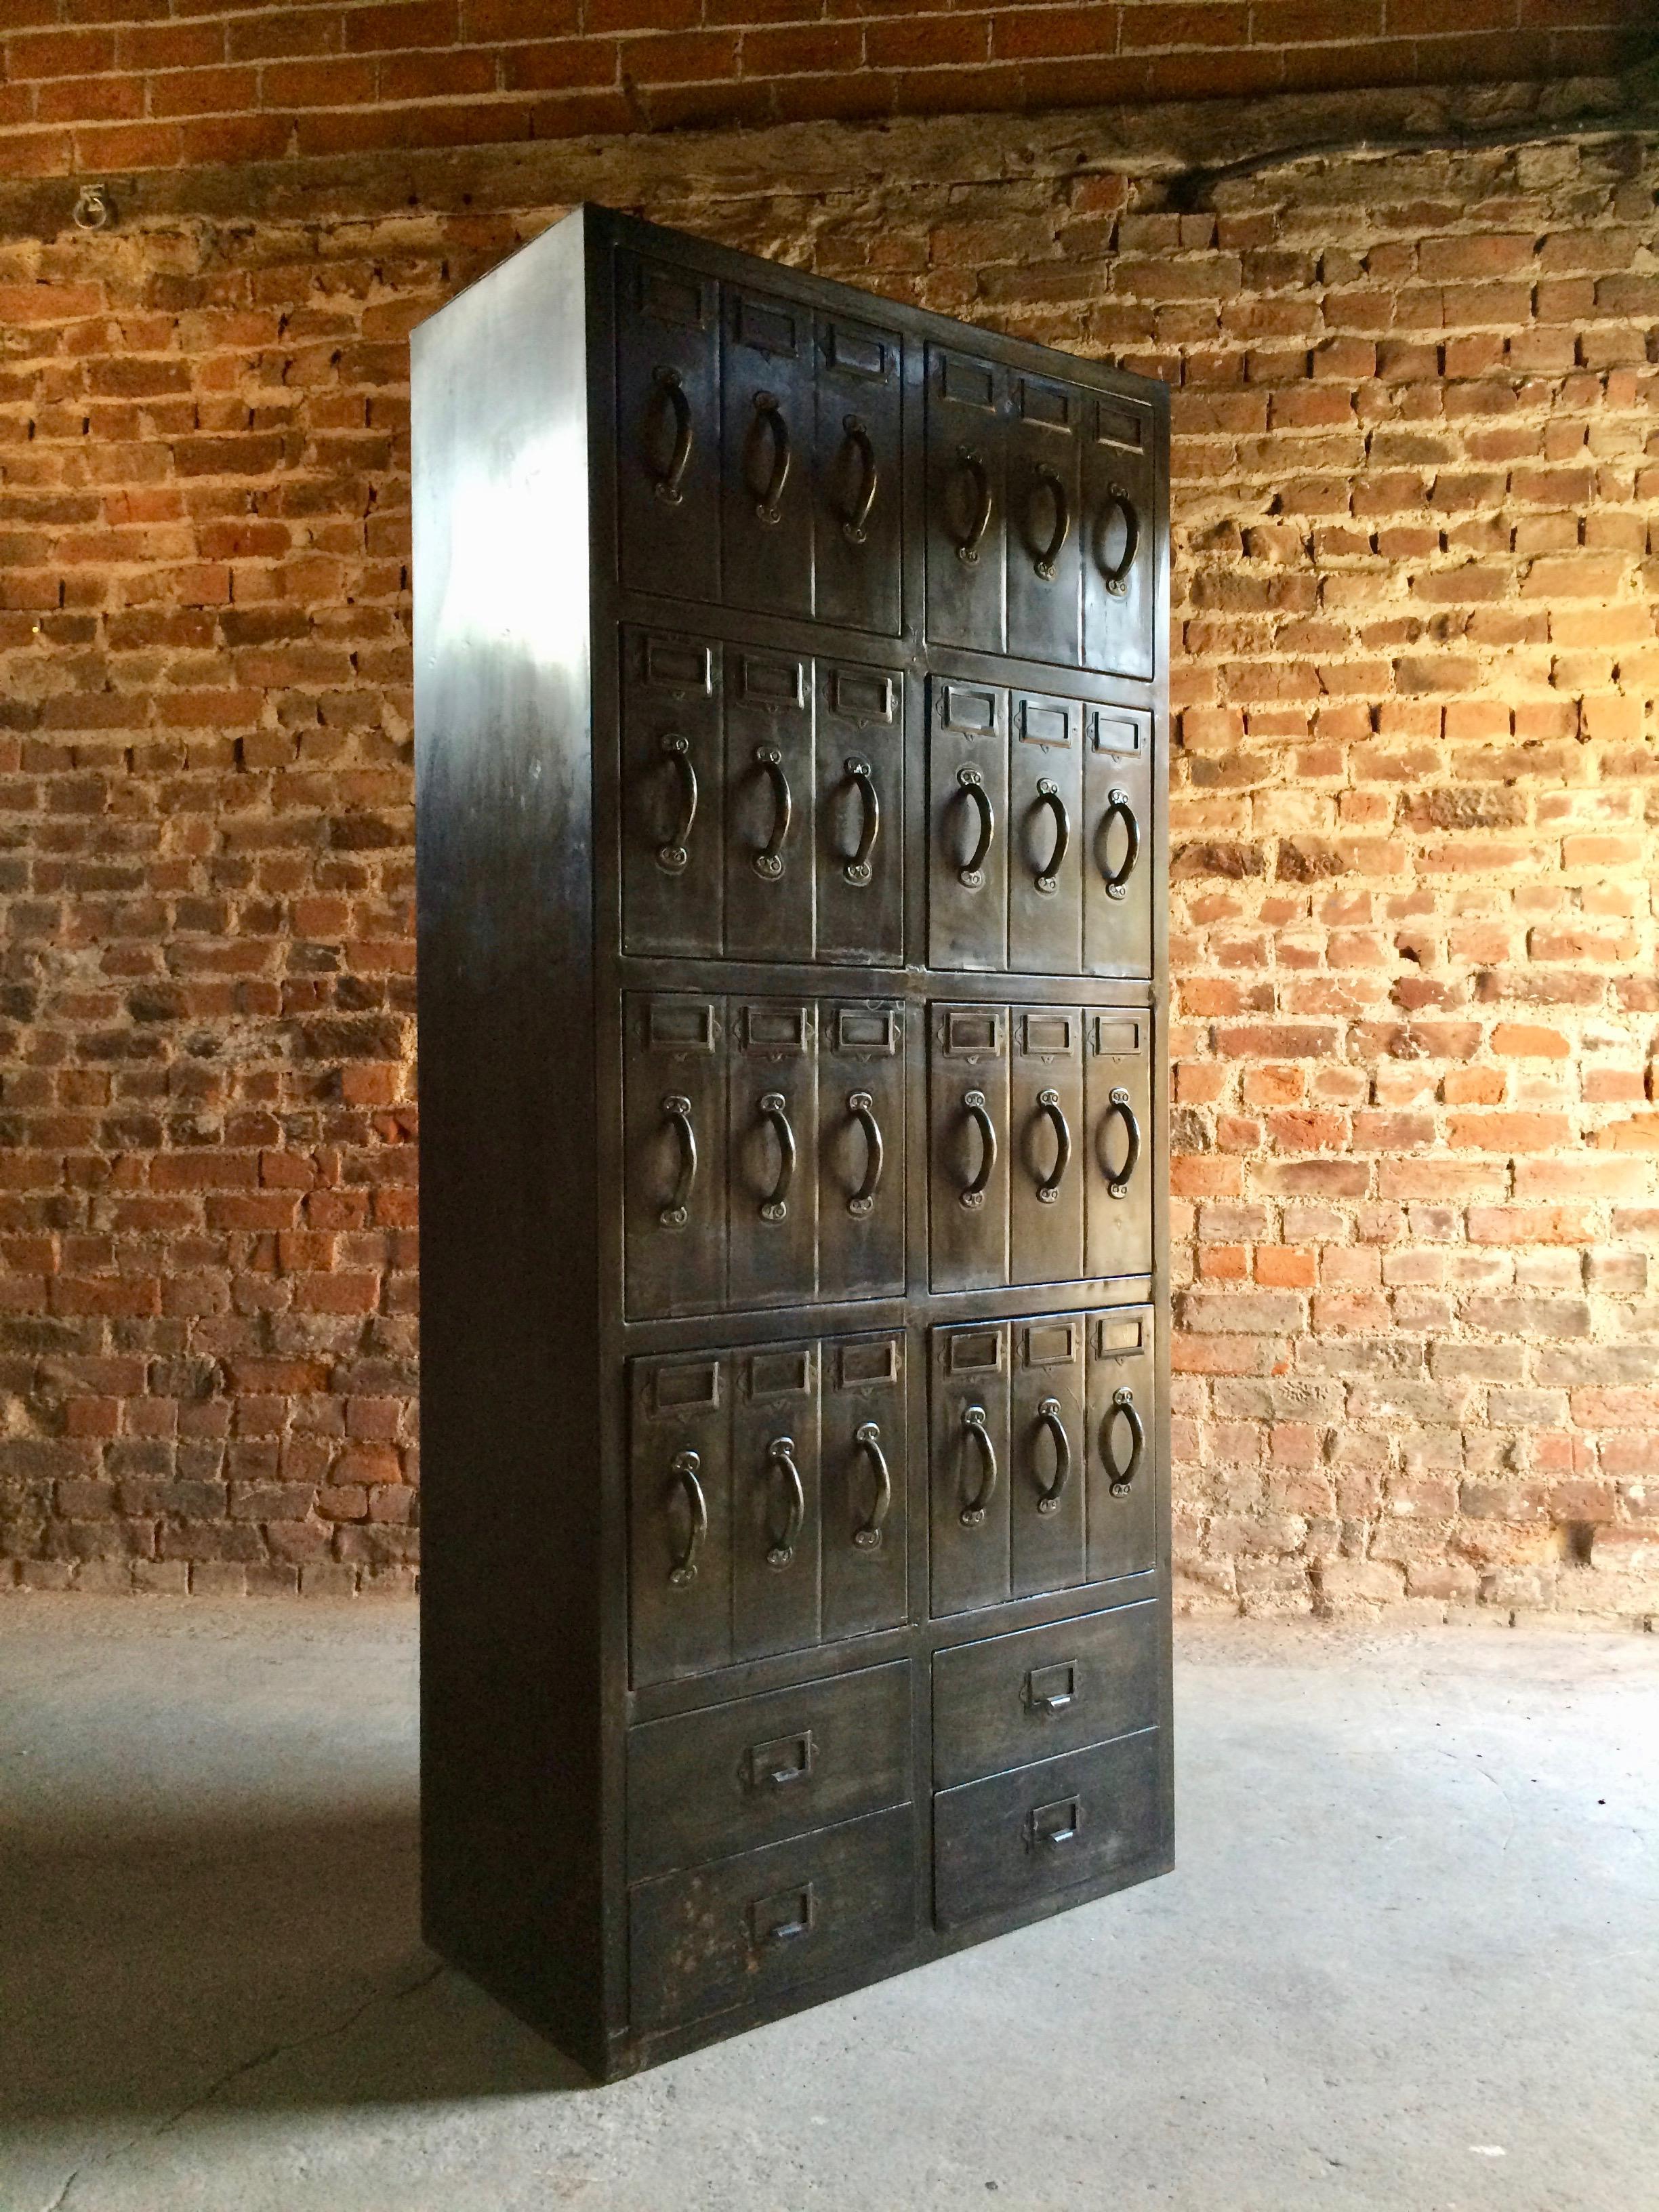 'As Good As It Gets' stunning bank of industrial steel lockers

A breathtakingly beautiful set of industrial banks of steel lockers of exceptional quality and style with eight drop down compartments each with three pull handles and index card